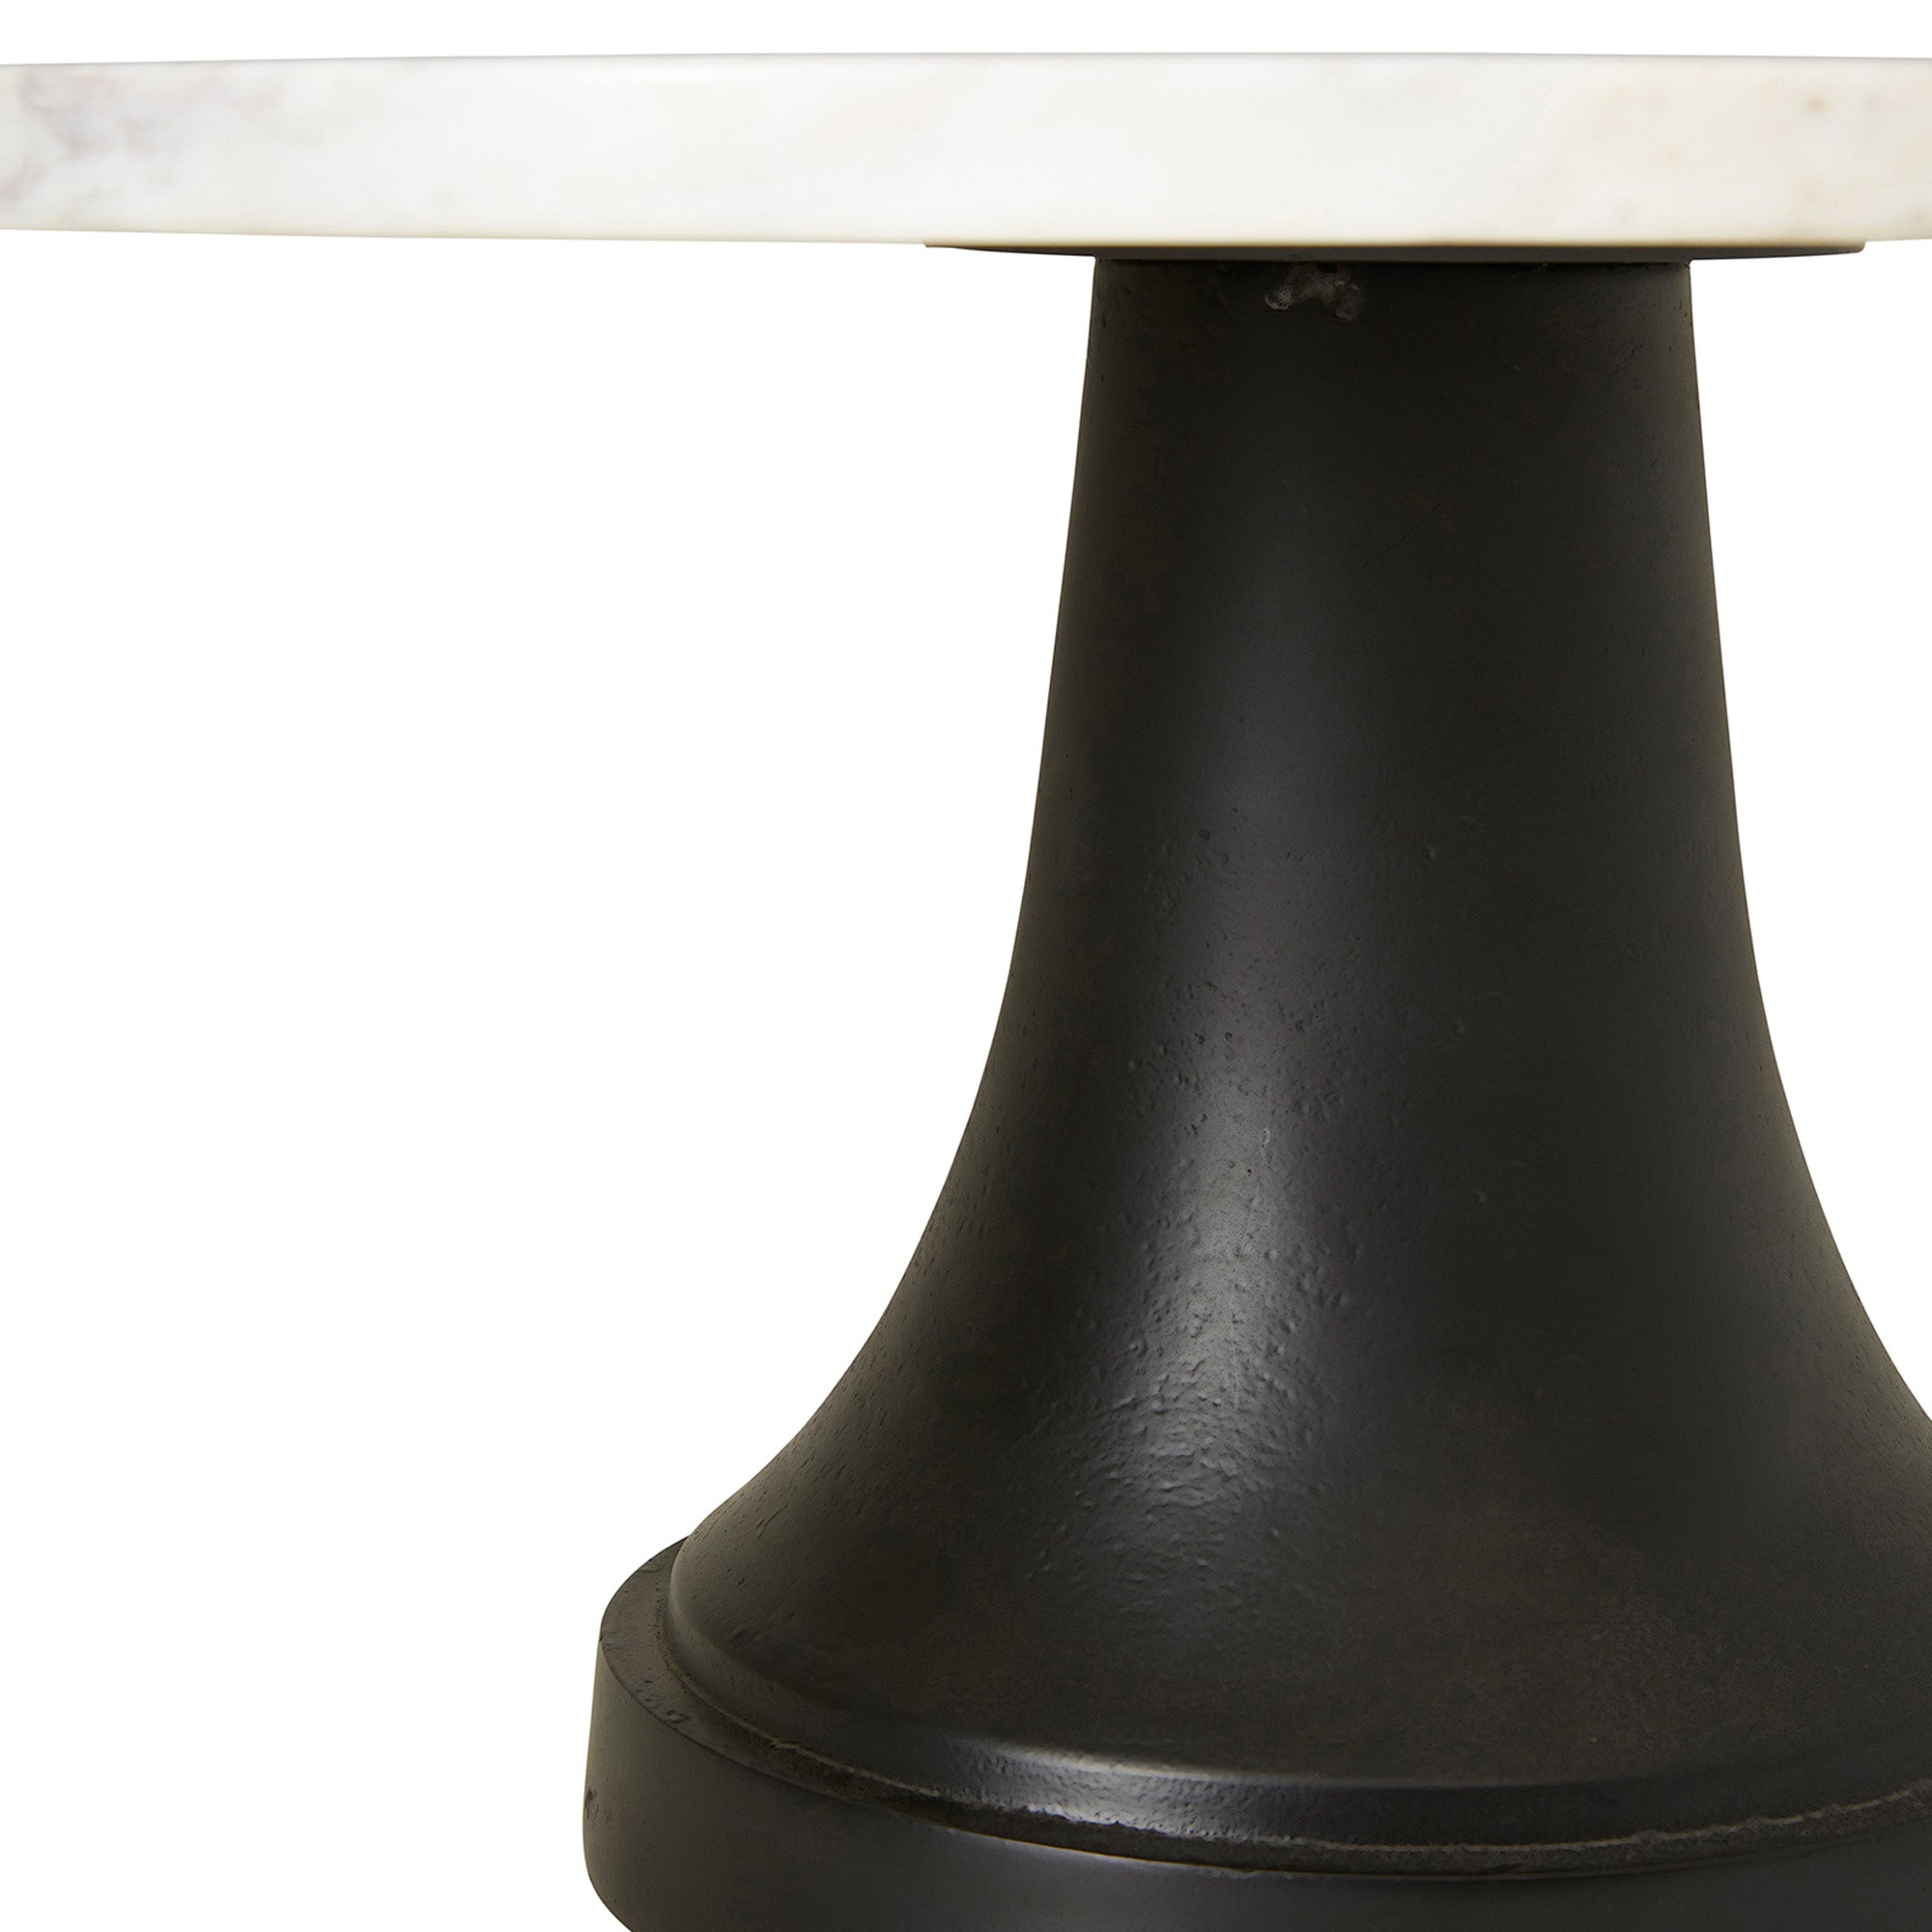 Tura Cake Stand Marble Large